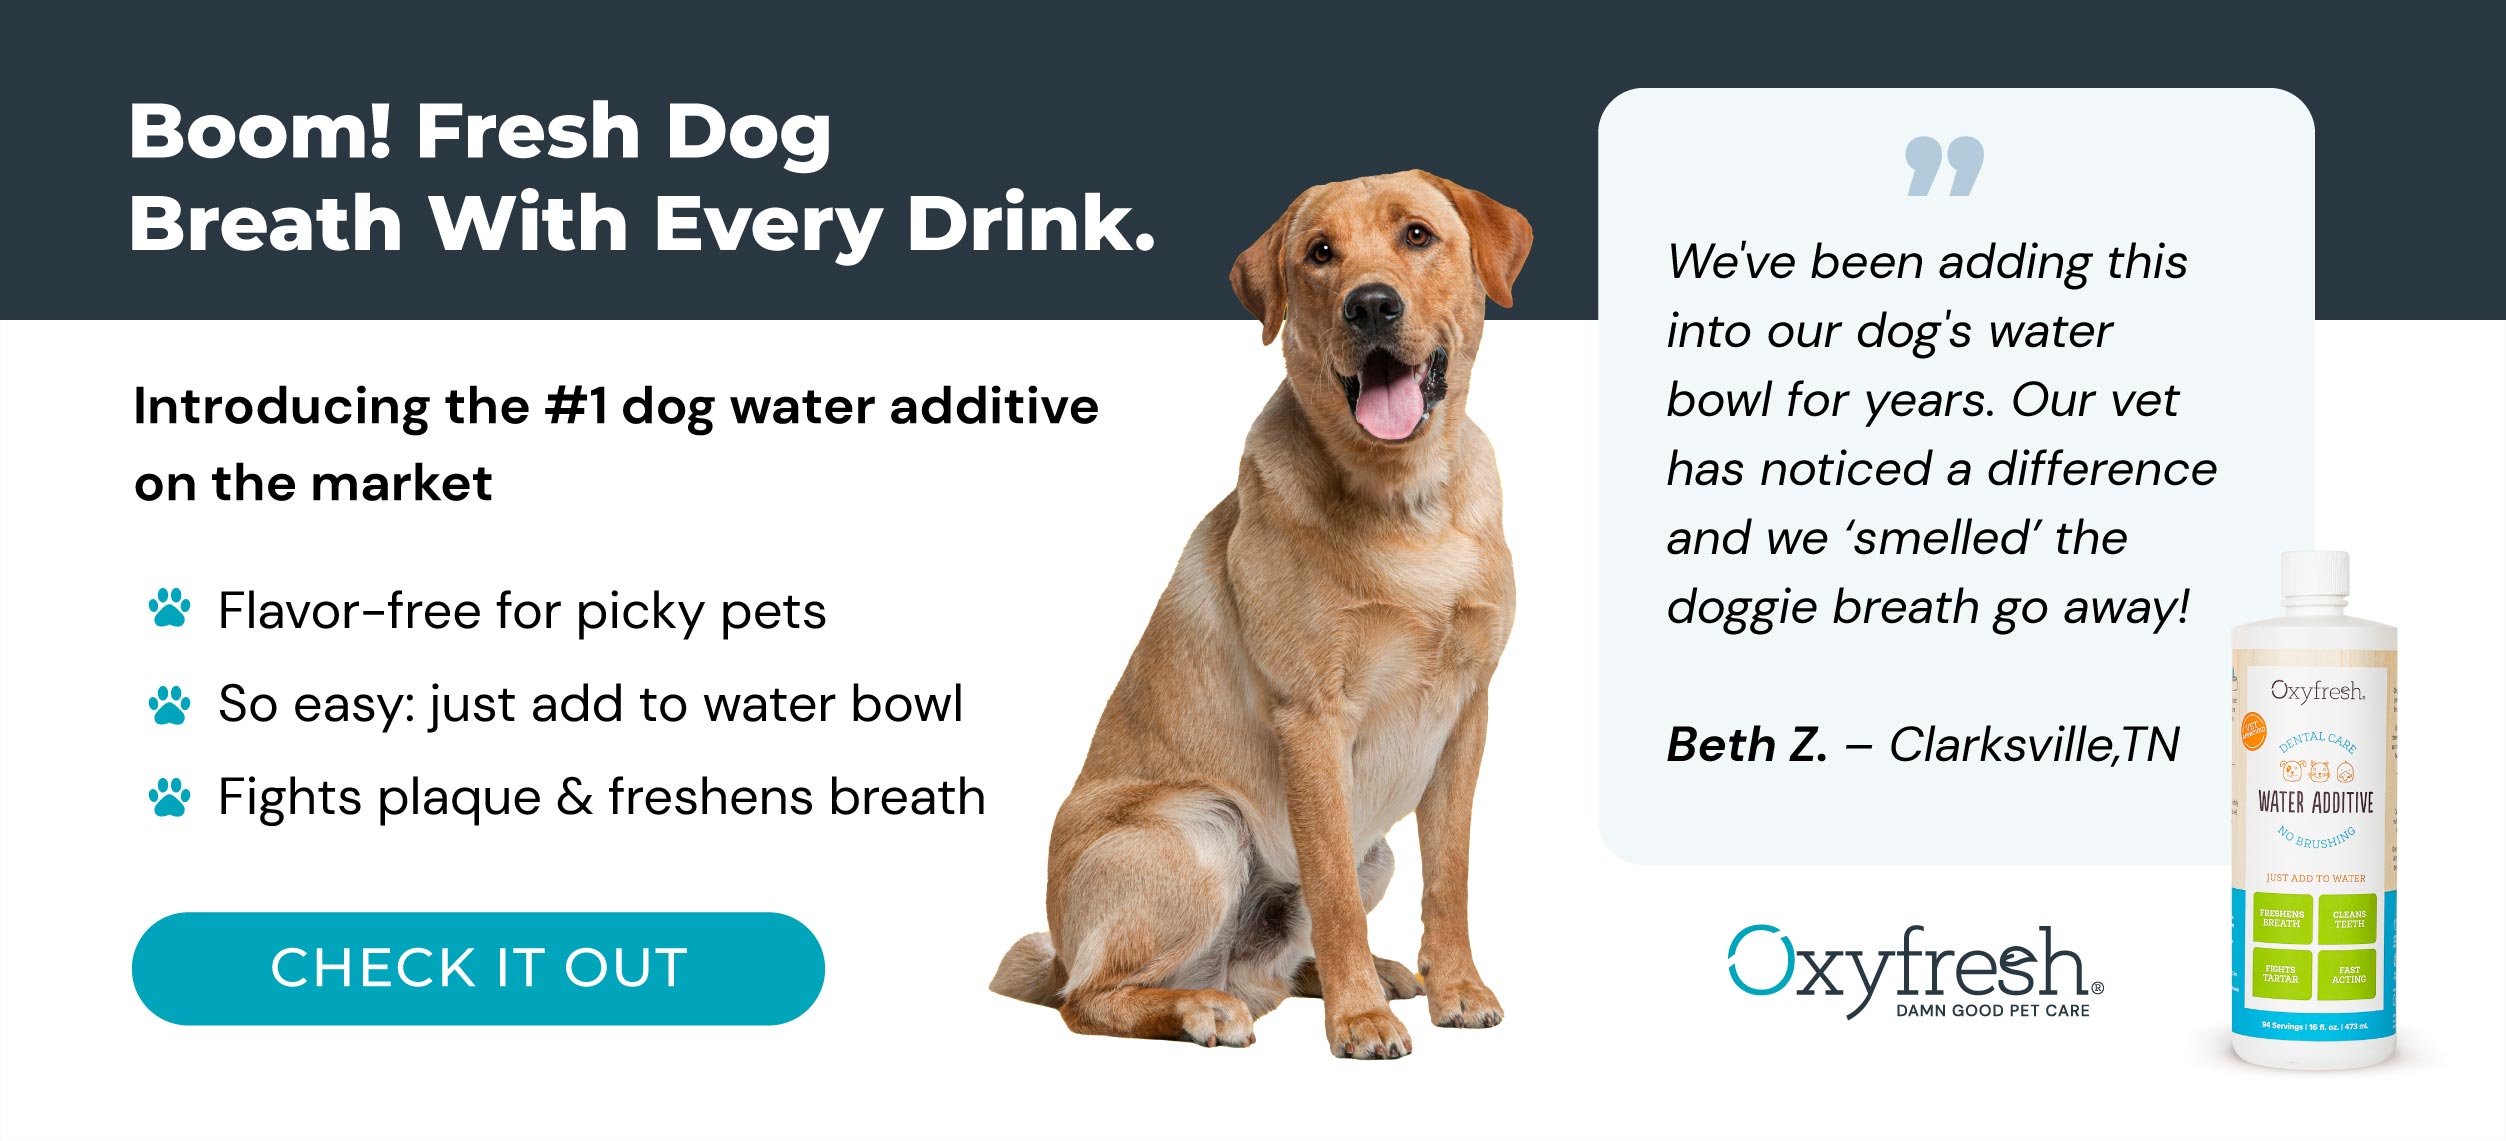 Boom Fresh dog breath with every drink. Introducing the #1 water additive on the market oxyfresh dog breath freshener